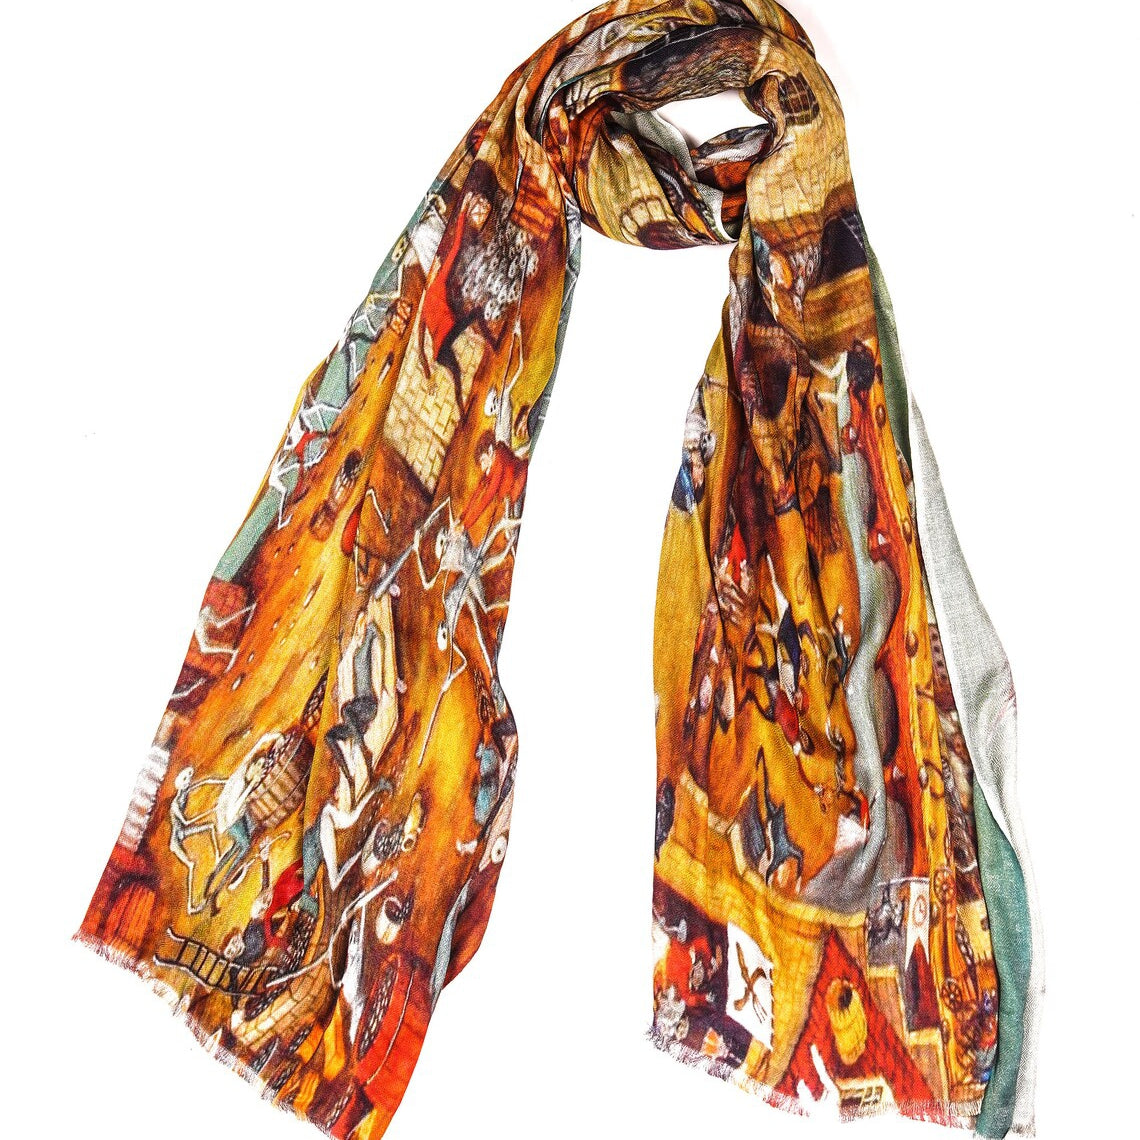 Silk Modal Scarf, long all season scarf in luxurious fabric blend, shawl and wrap, accessories for women, gifts for her, summer scarf, shawl - Mustard